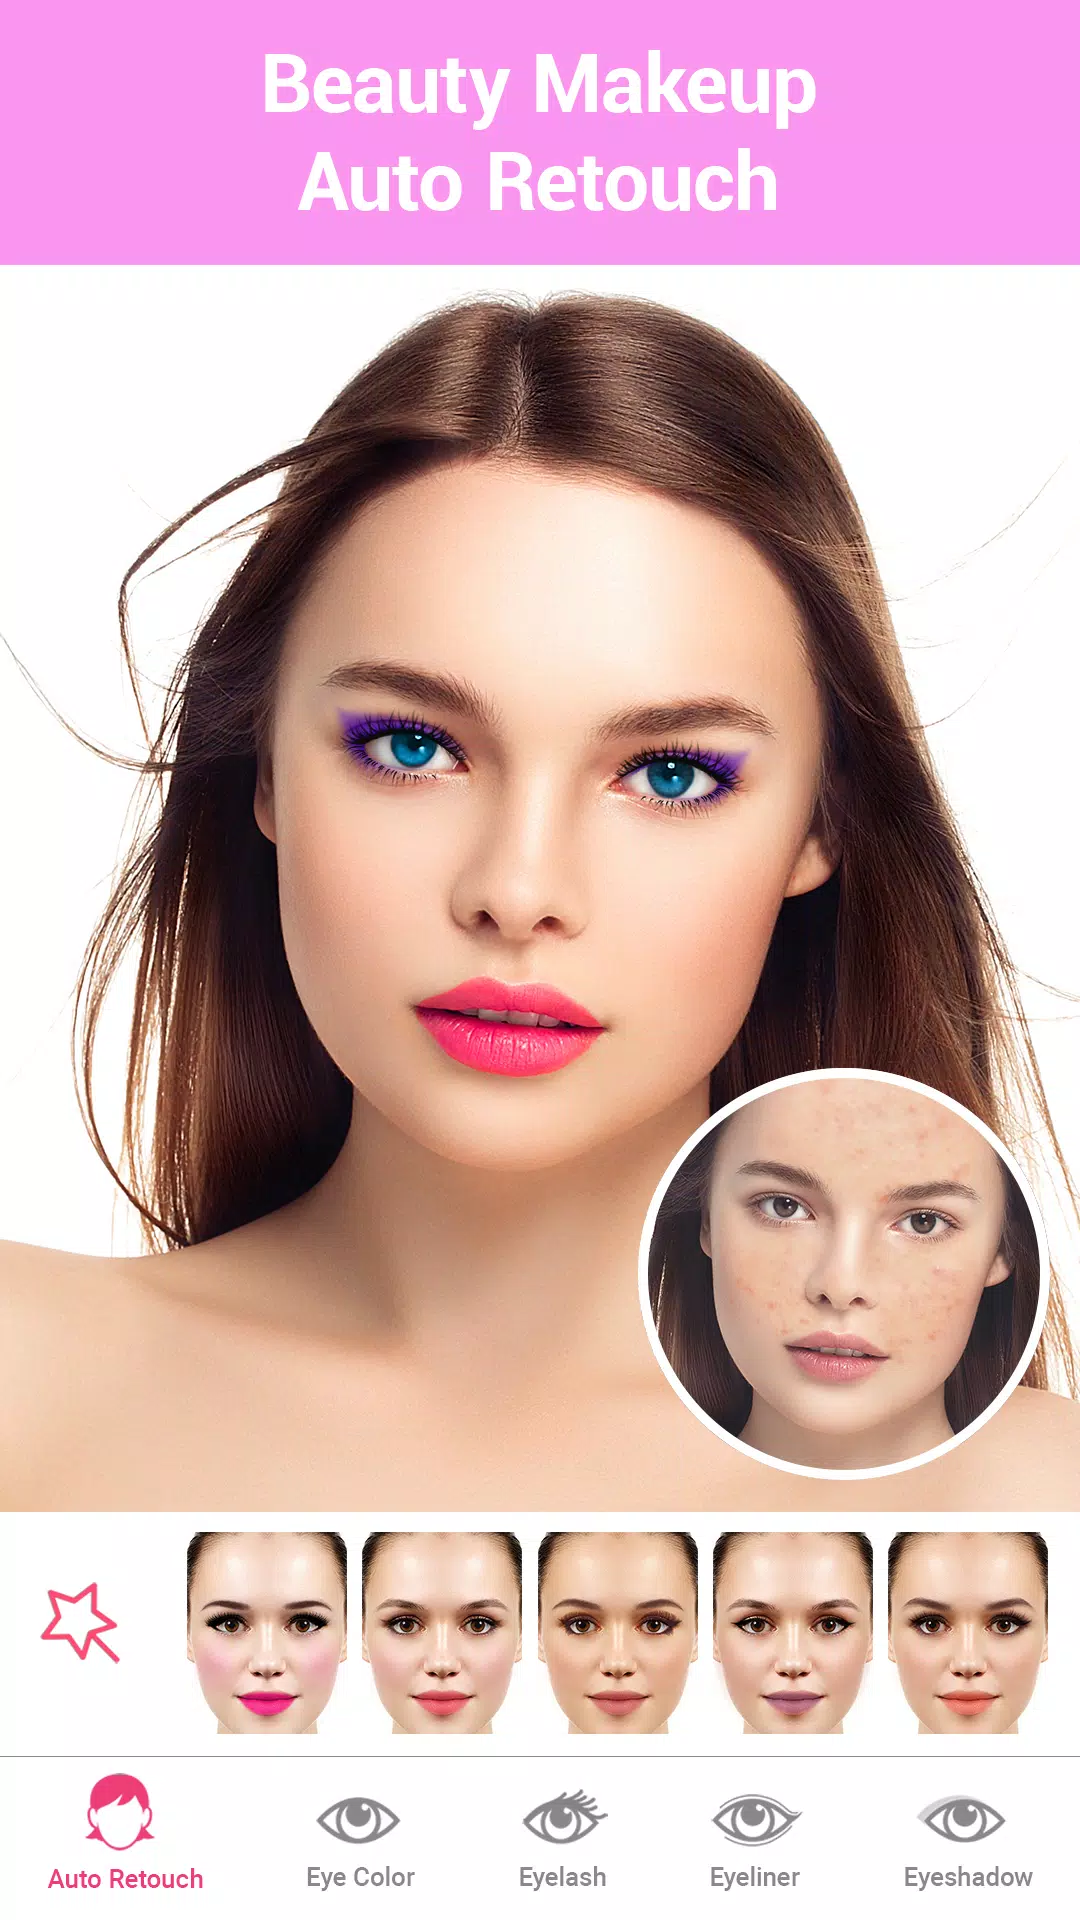 Beauty Makeup for Android - APK Download